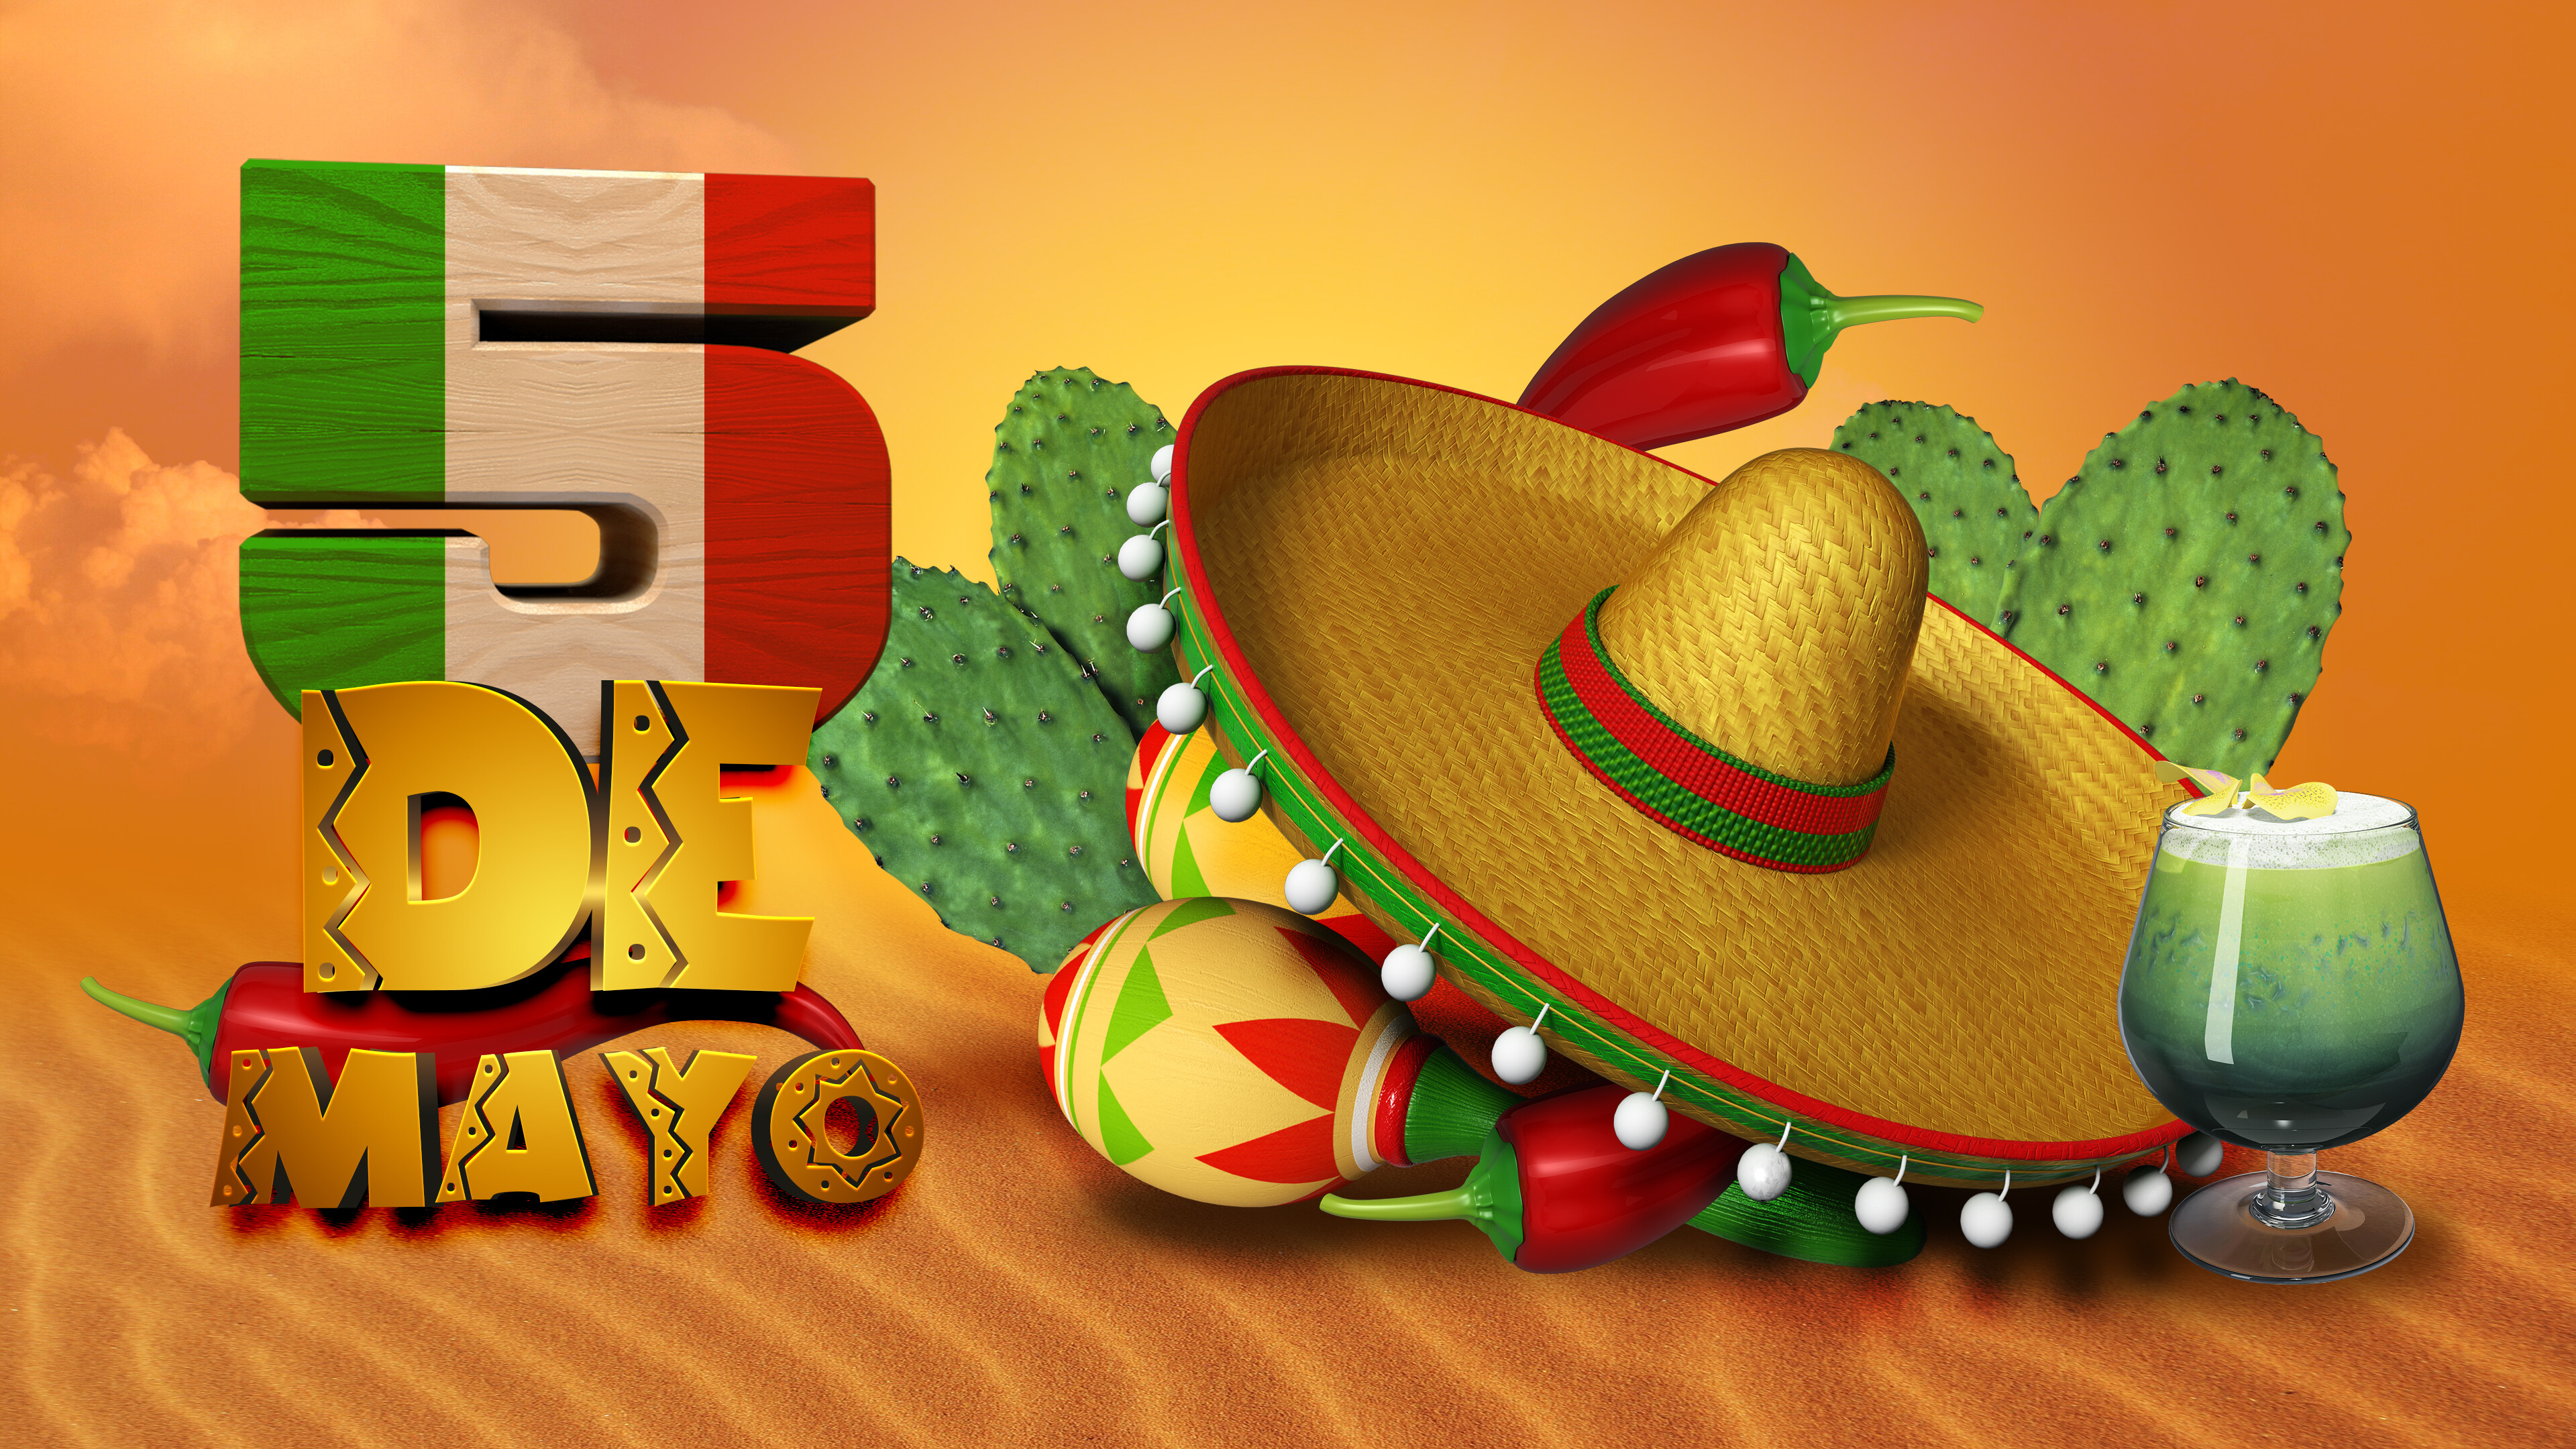 Mexican Fiesta: Cinco de Mayo, A yearly celebration held on May 5, which commemorates the anniversary of Mexico's victory over the Second French Empire at the Battle of Puebla in 1862, led by General Ignacio Zaragoza. 3840x2160 4K Background.